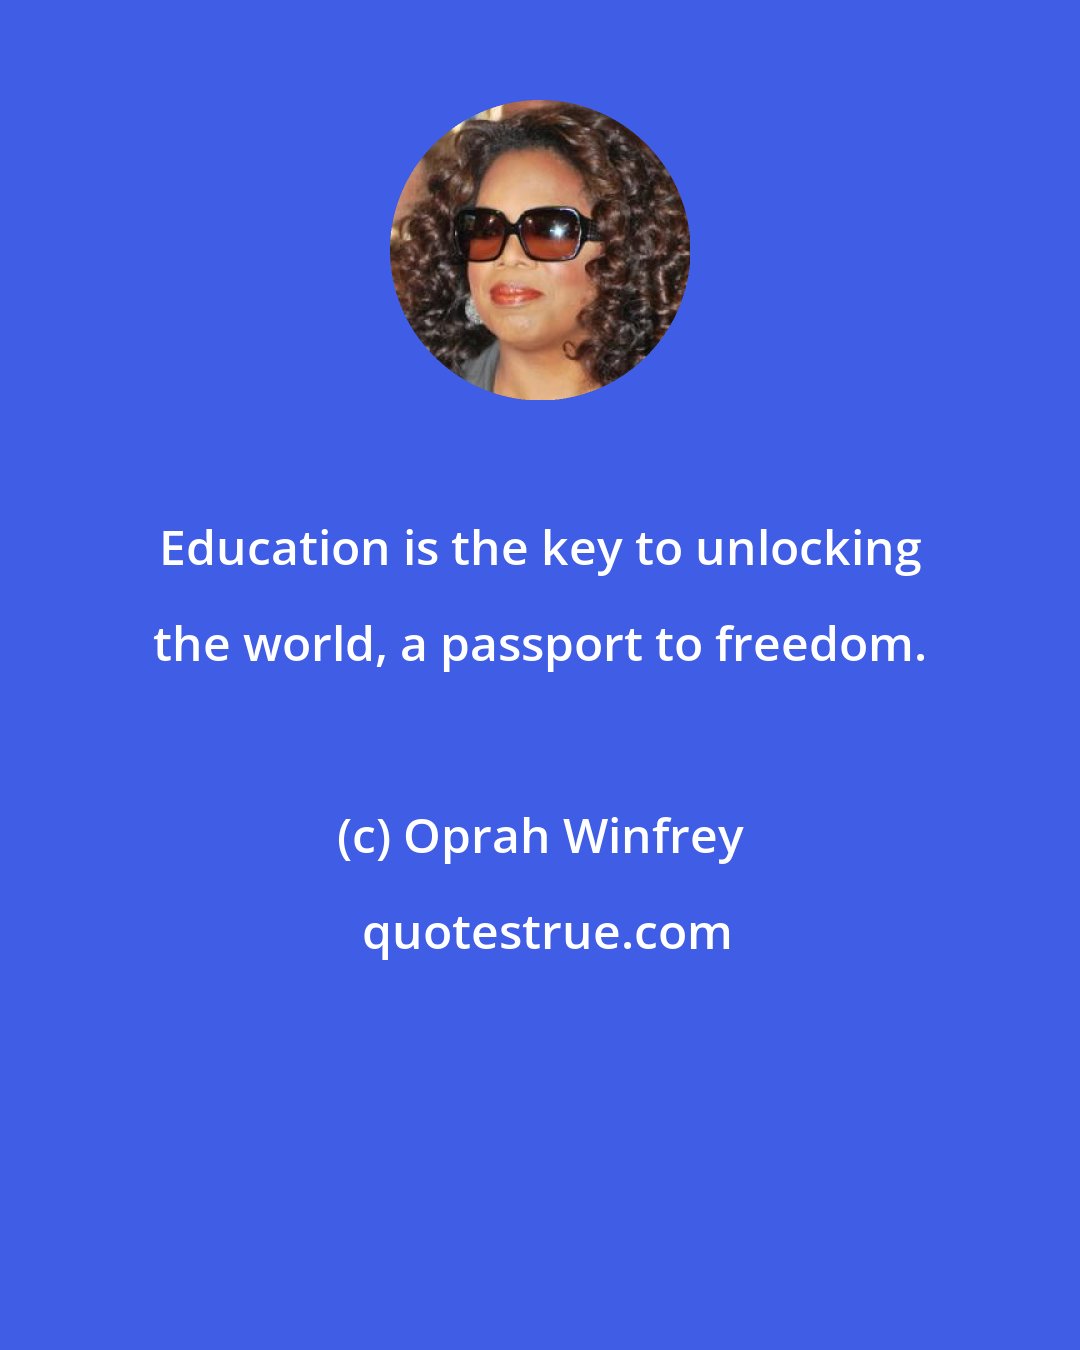 Oprah Winfrey: Education is the key to unlocking the world, a passport to freedom.